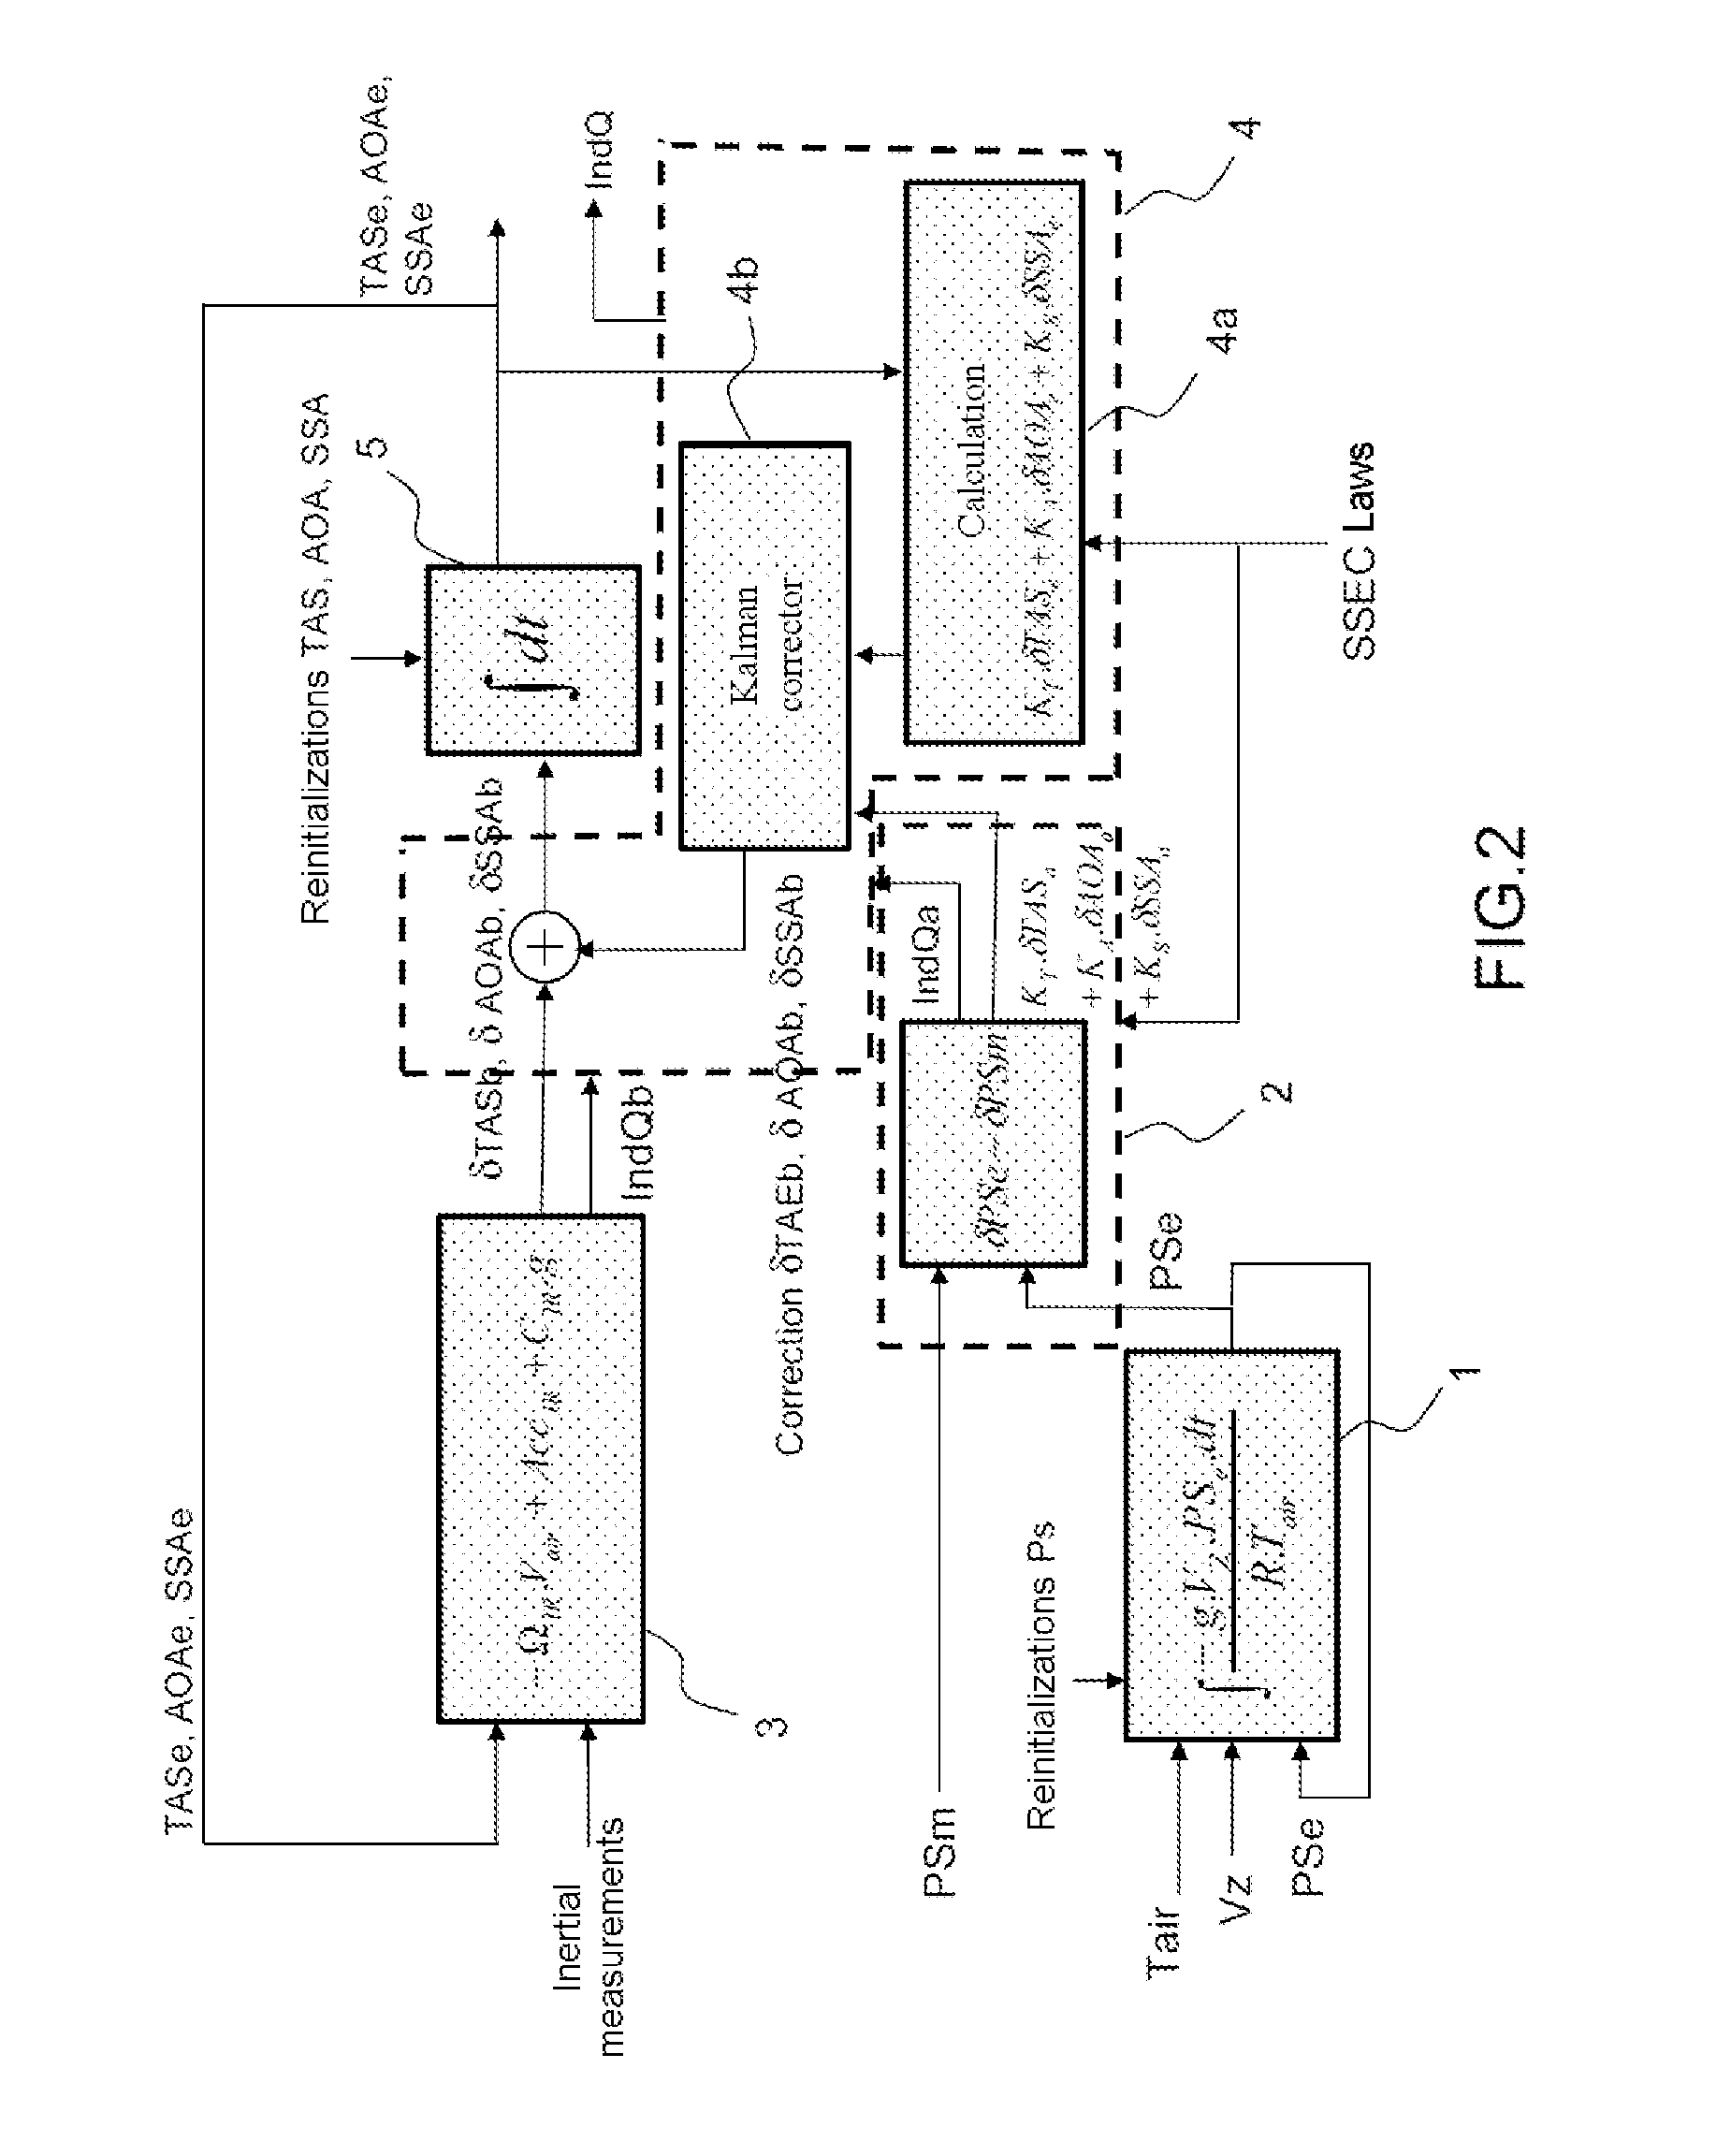 Method of estimation of the speed of an aircraft relative to the surrounding air, and associated system